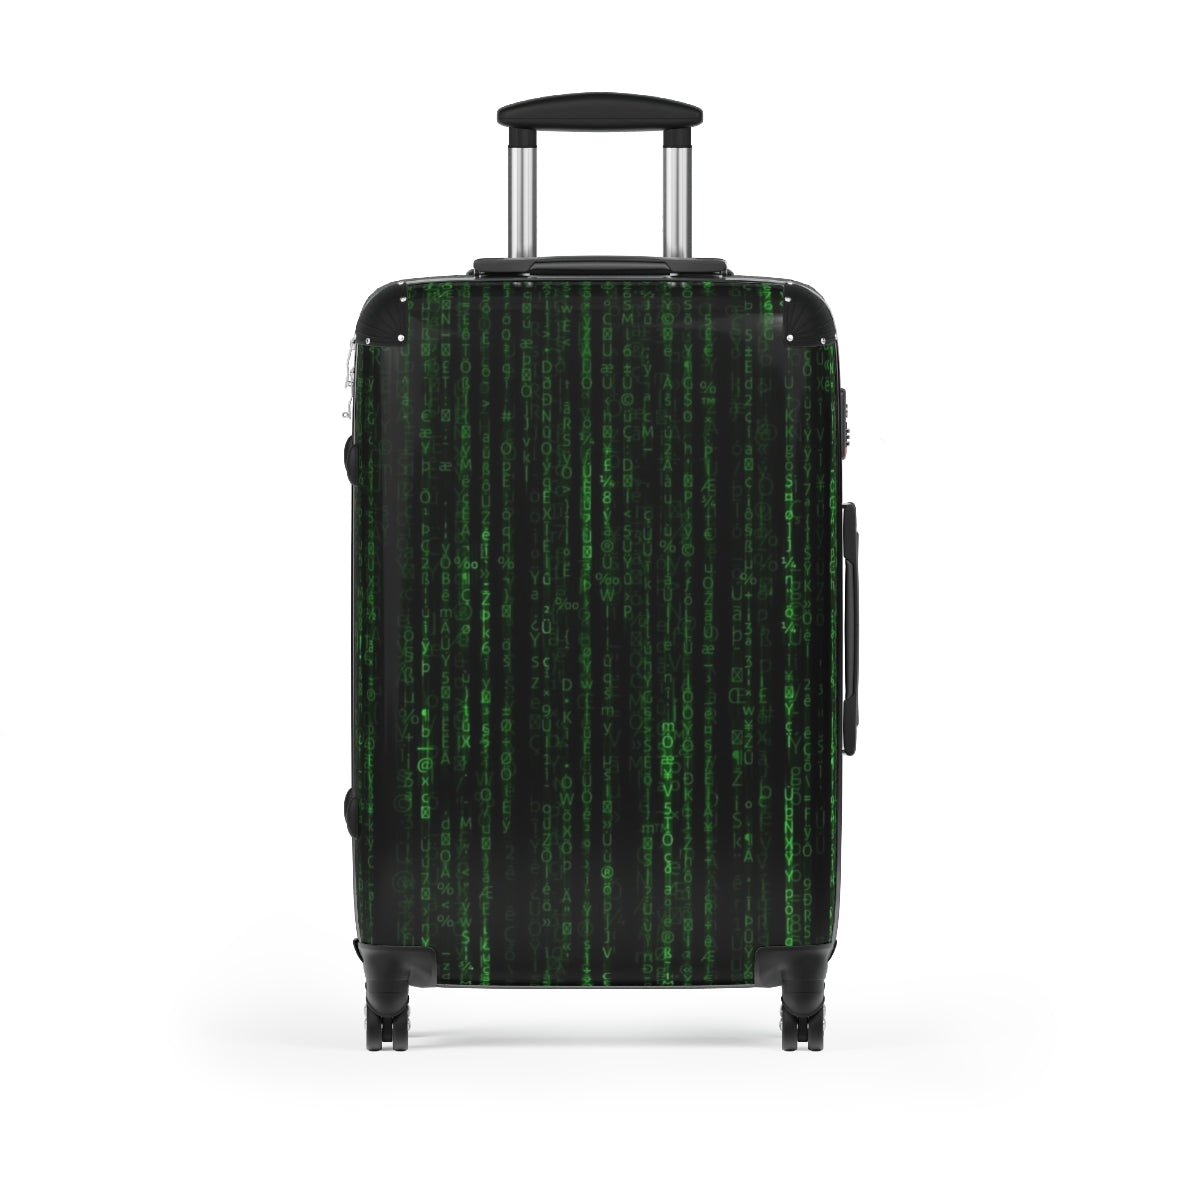 Getrott The Matrix Reloaded Resurrections Revolutions Trilogy Matrixmovies Glitch in the Matrix Animatrix Keanu Reeves World Classic Poster Black Cabin Suitcase Carry-On Travel Check Luggage 4-Wheel Spinner Suitcase Bag Multiple Colors and Sizes